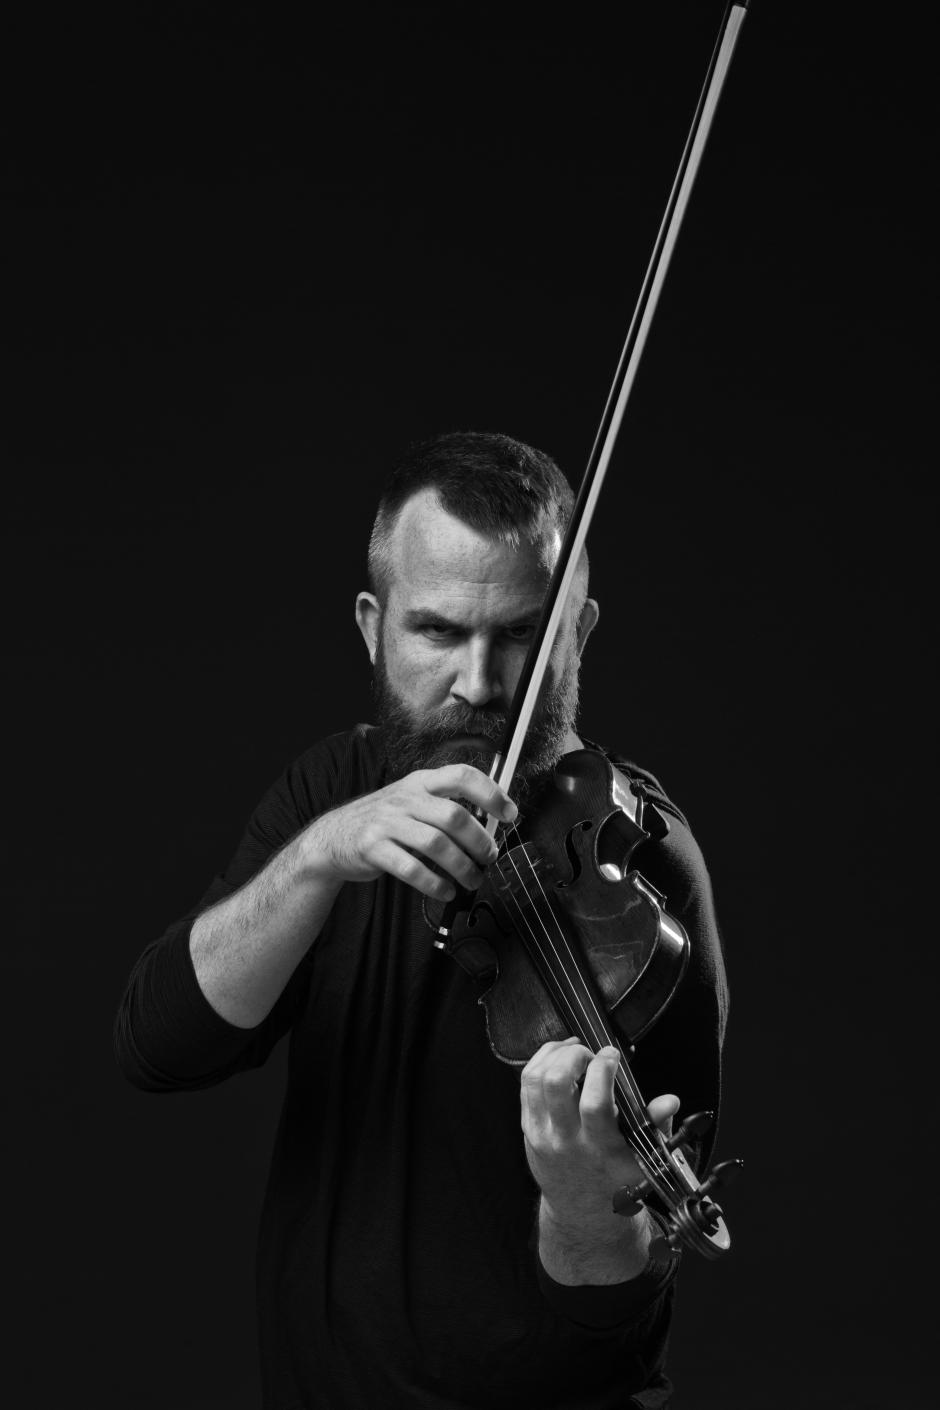 Black and white photo of man looking at camera while holding a violin